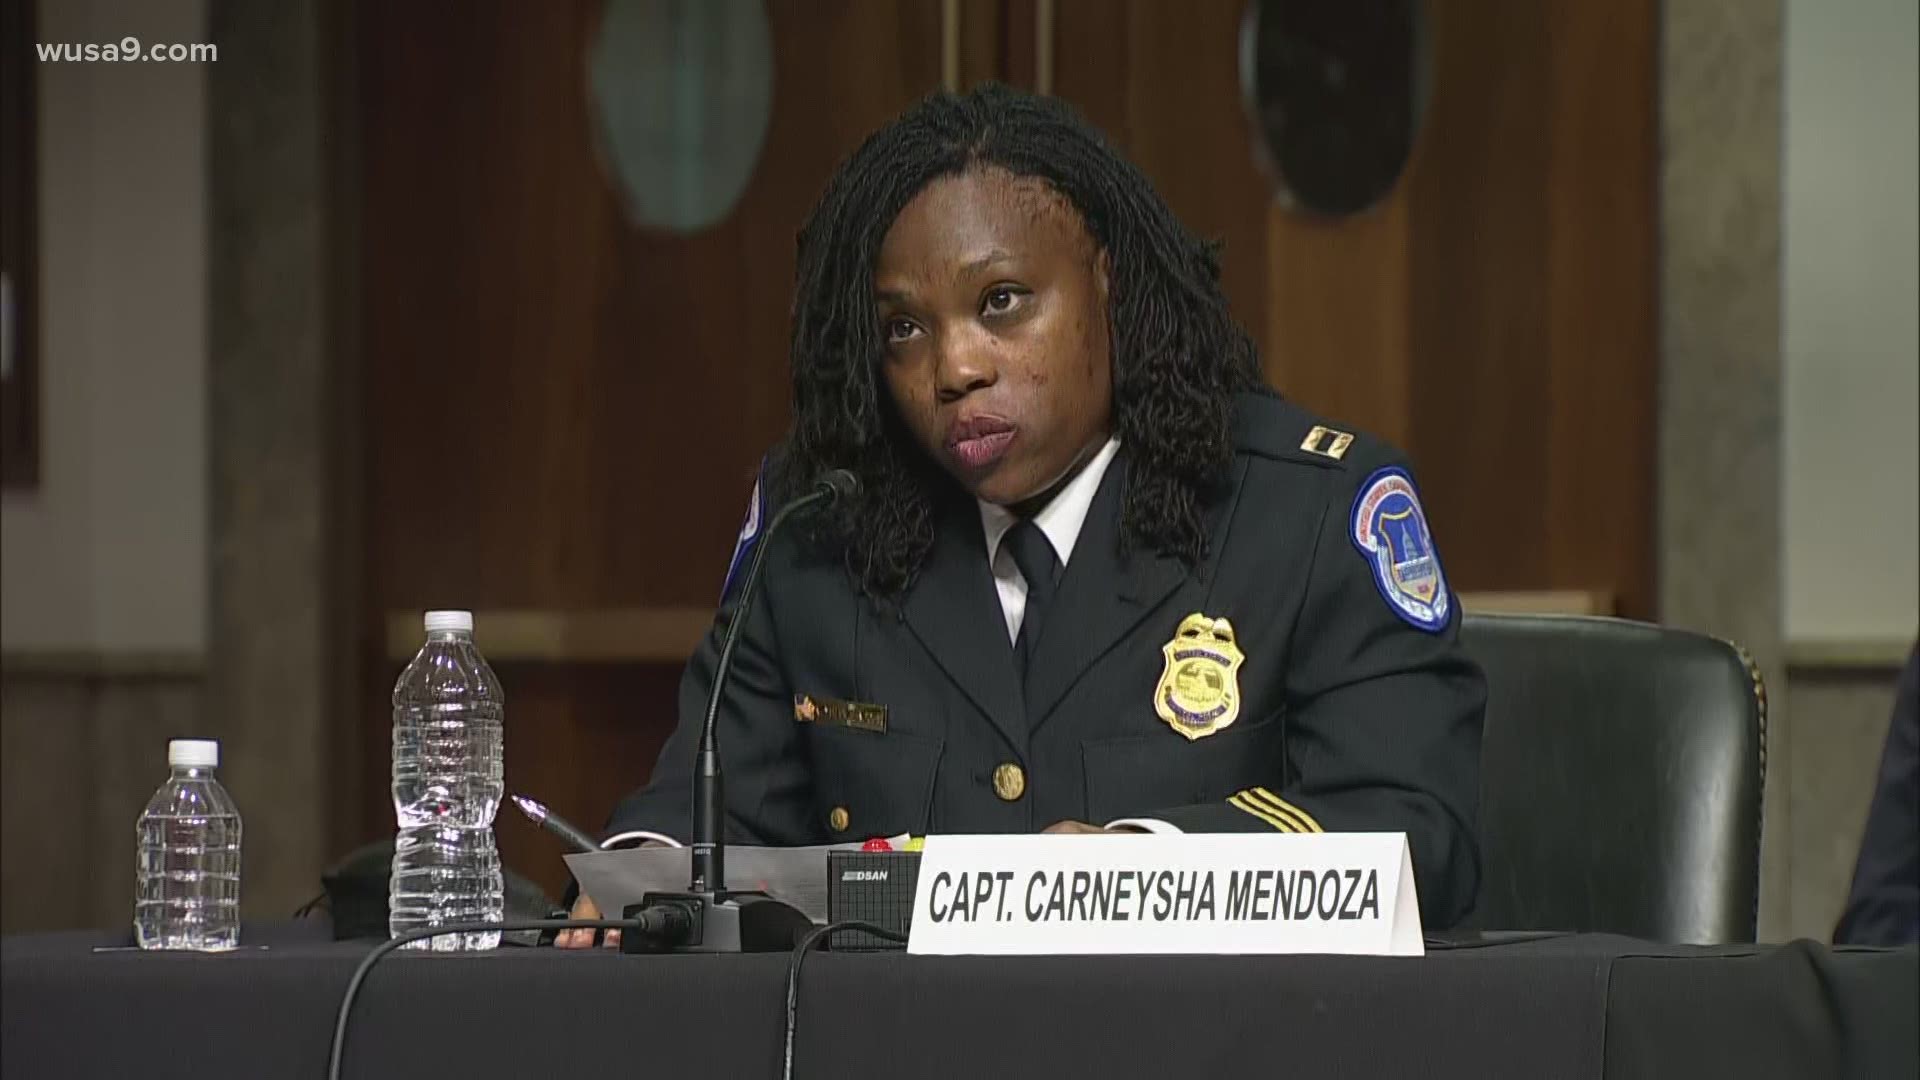 Captain Carneysha Mendoza is the first to testify at the Capitol riot hearings.